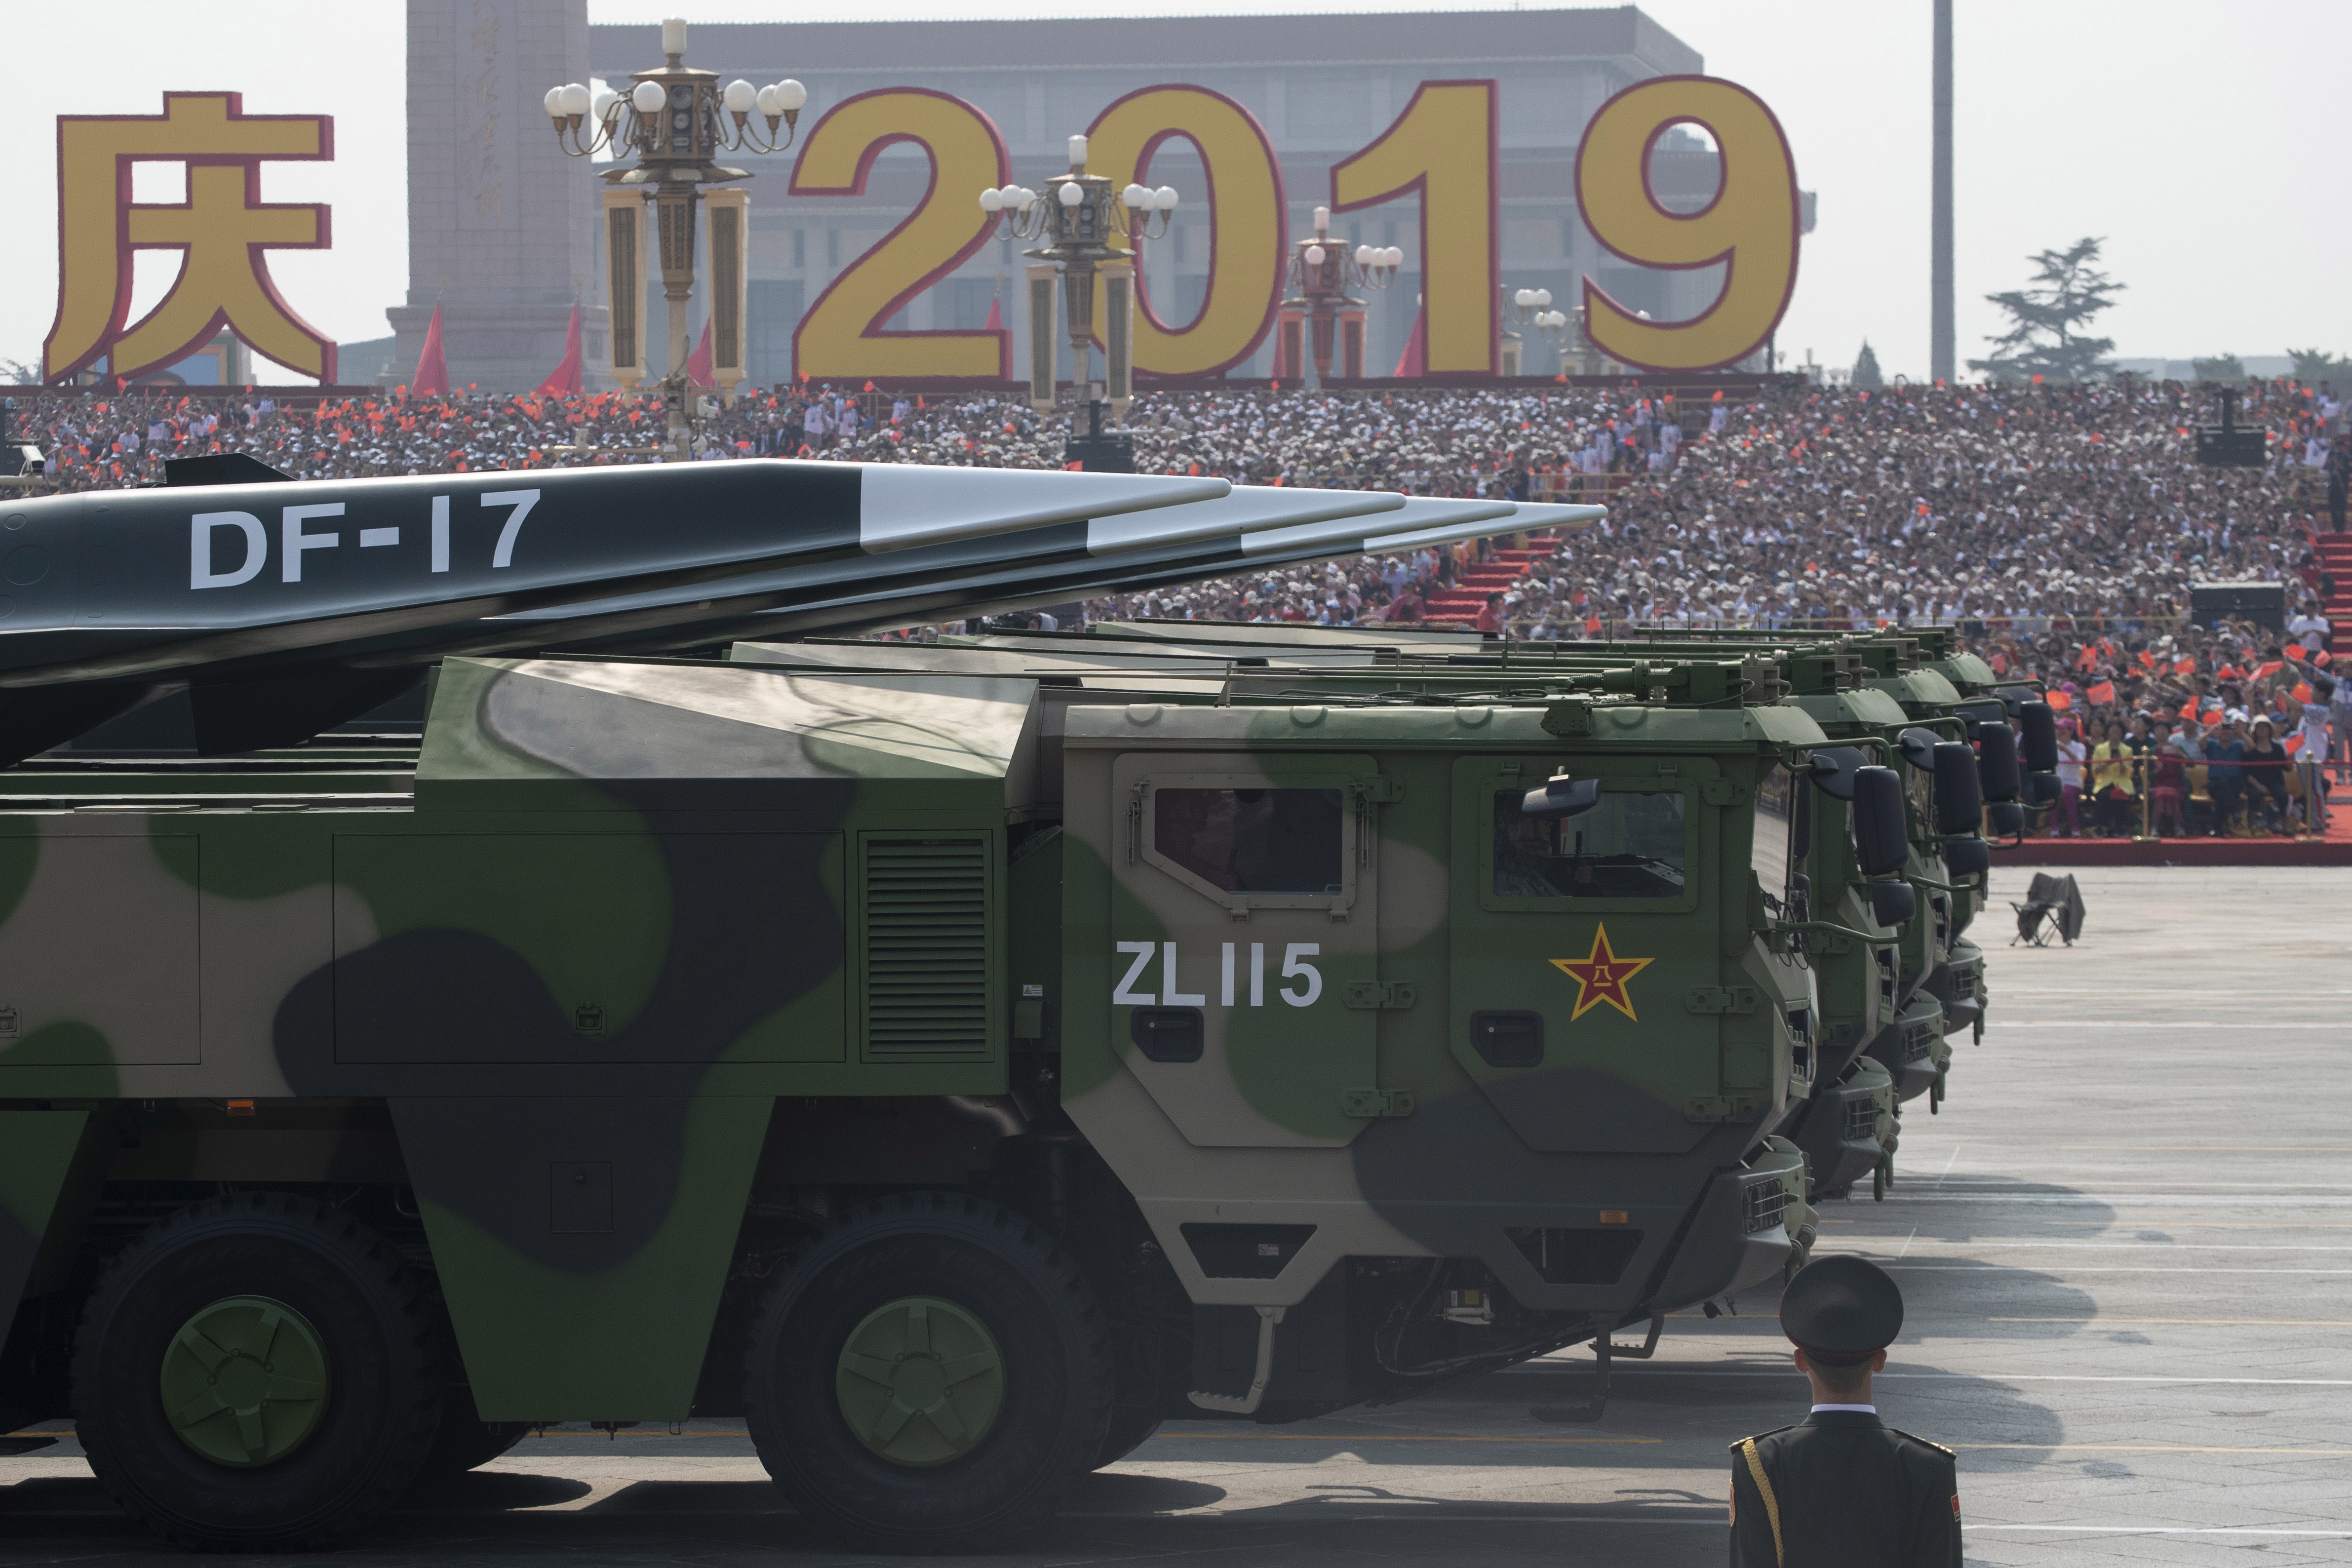 China’s DF-17 hypersonic boost-glide missile was one of the most closely watched items on parade in Beijing on Tuesday. Photo: AP